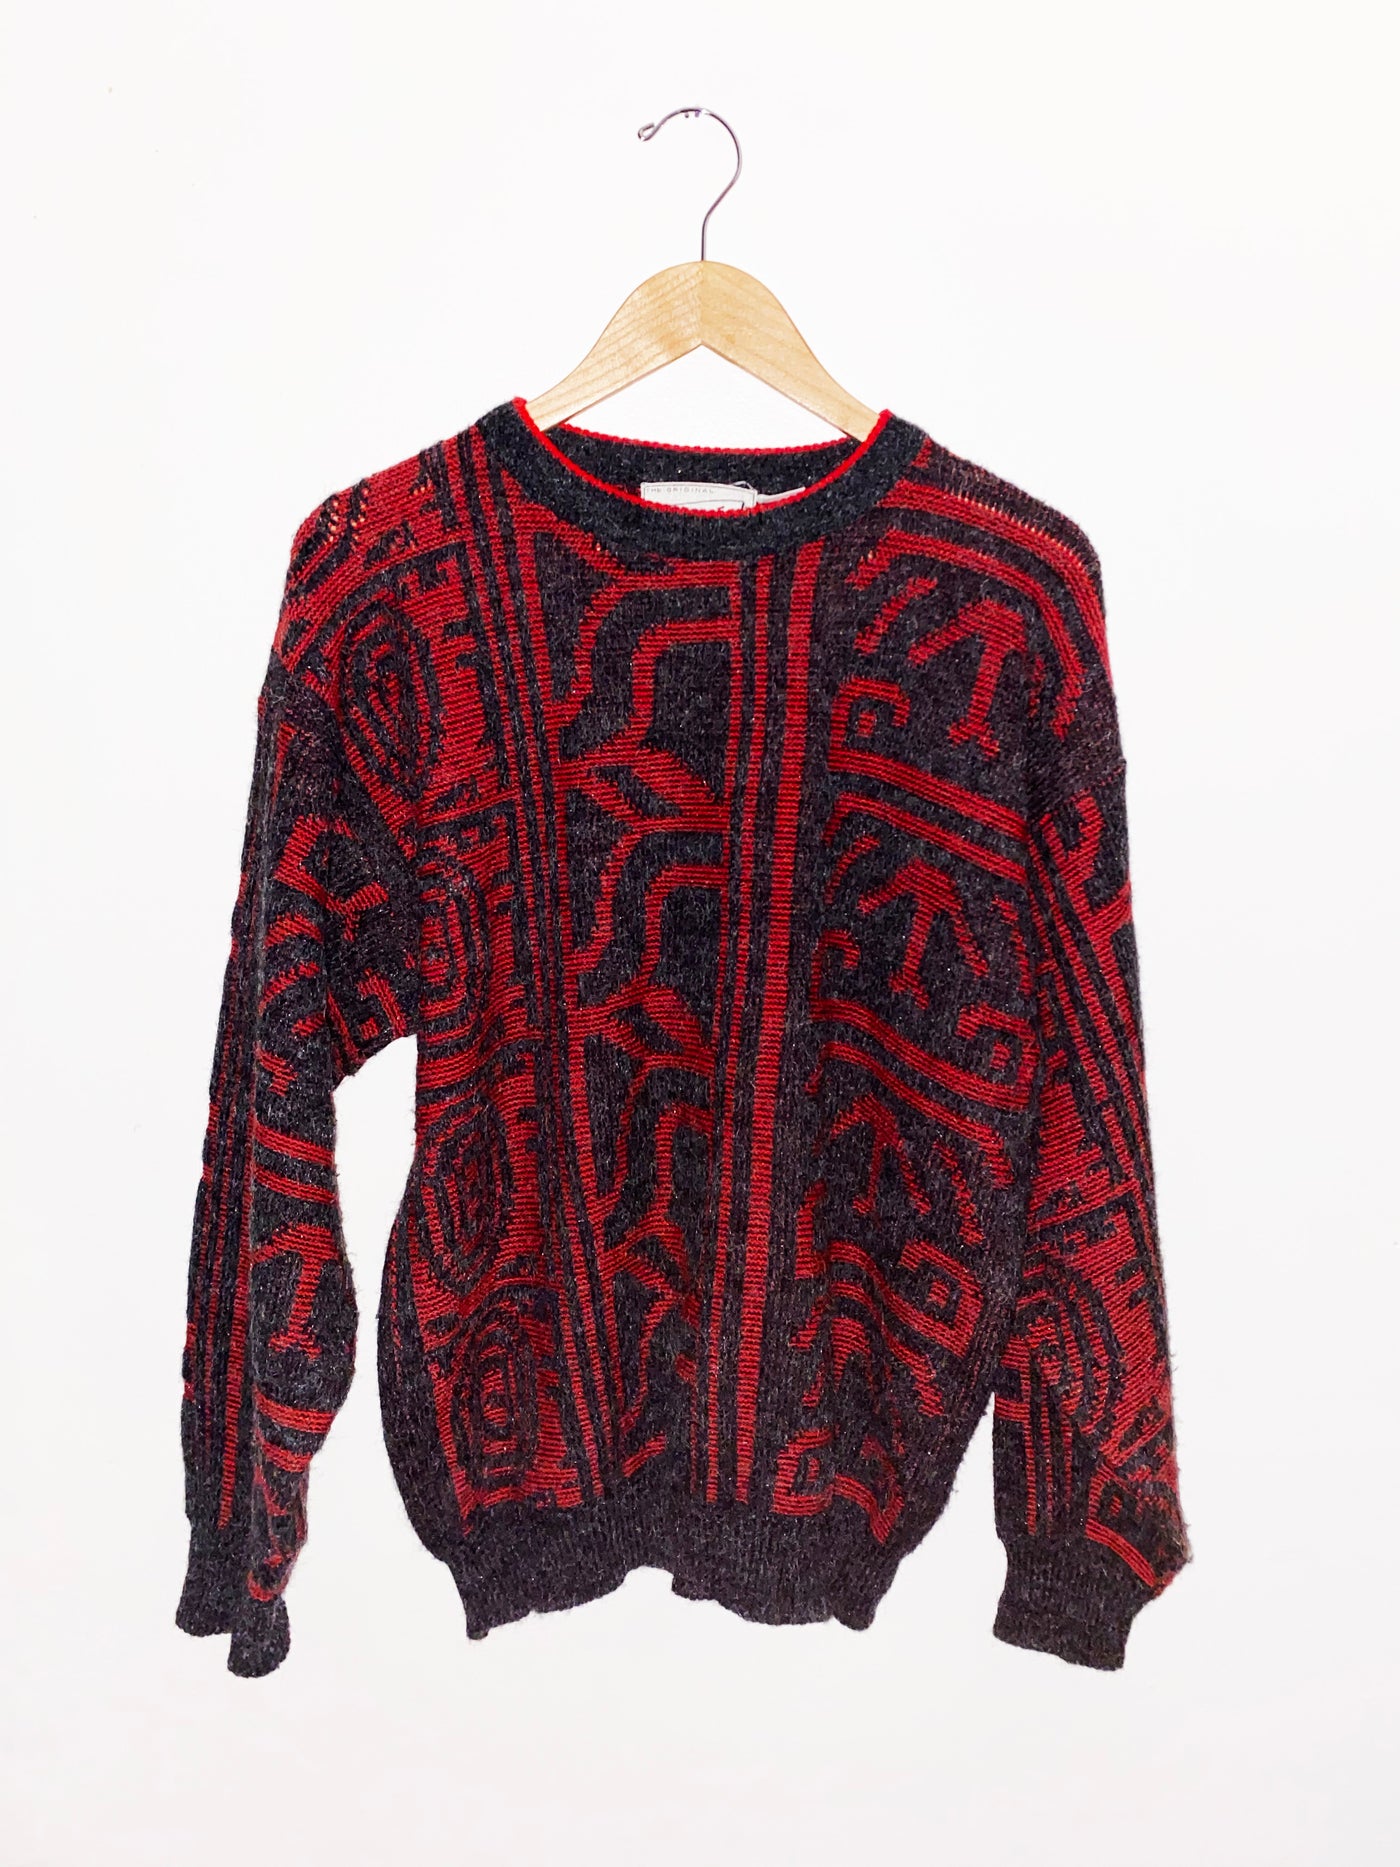 Vintage Inprivate Knit Sweater